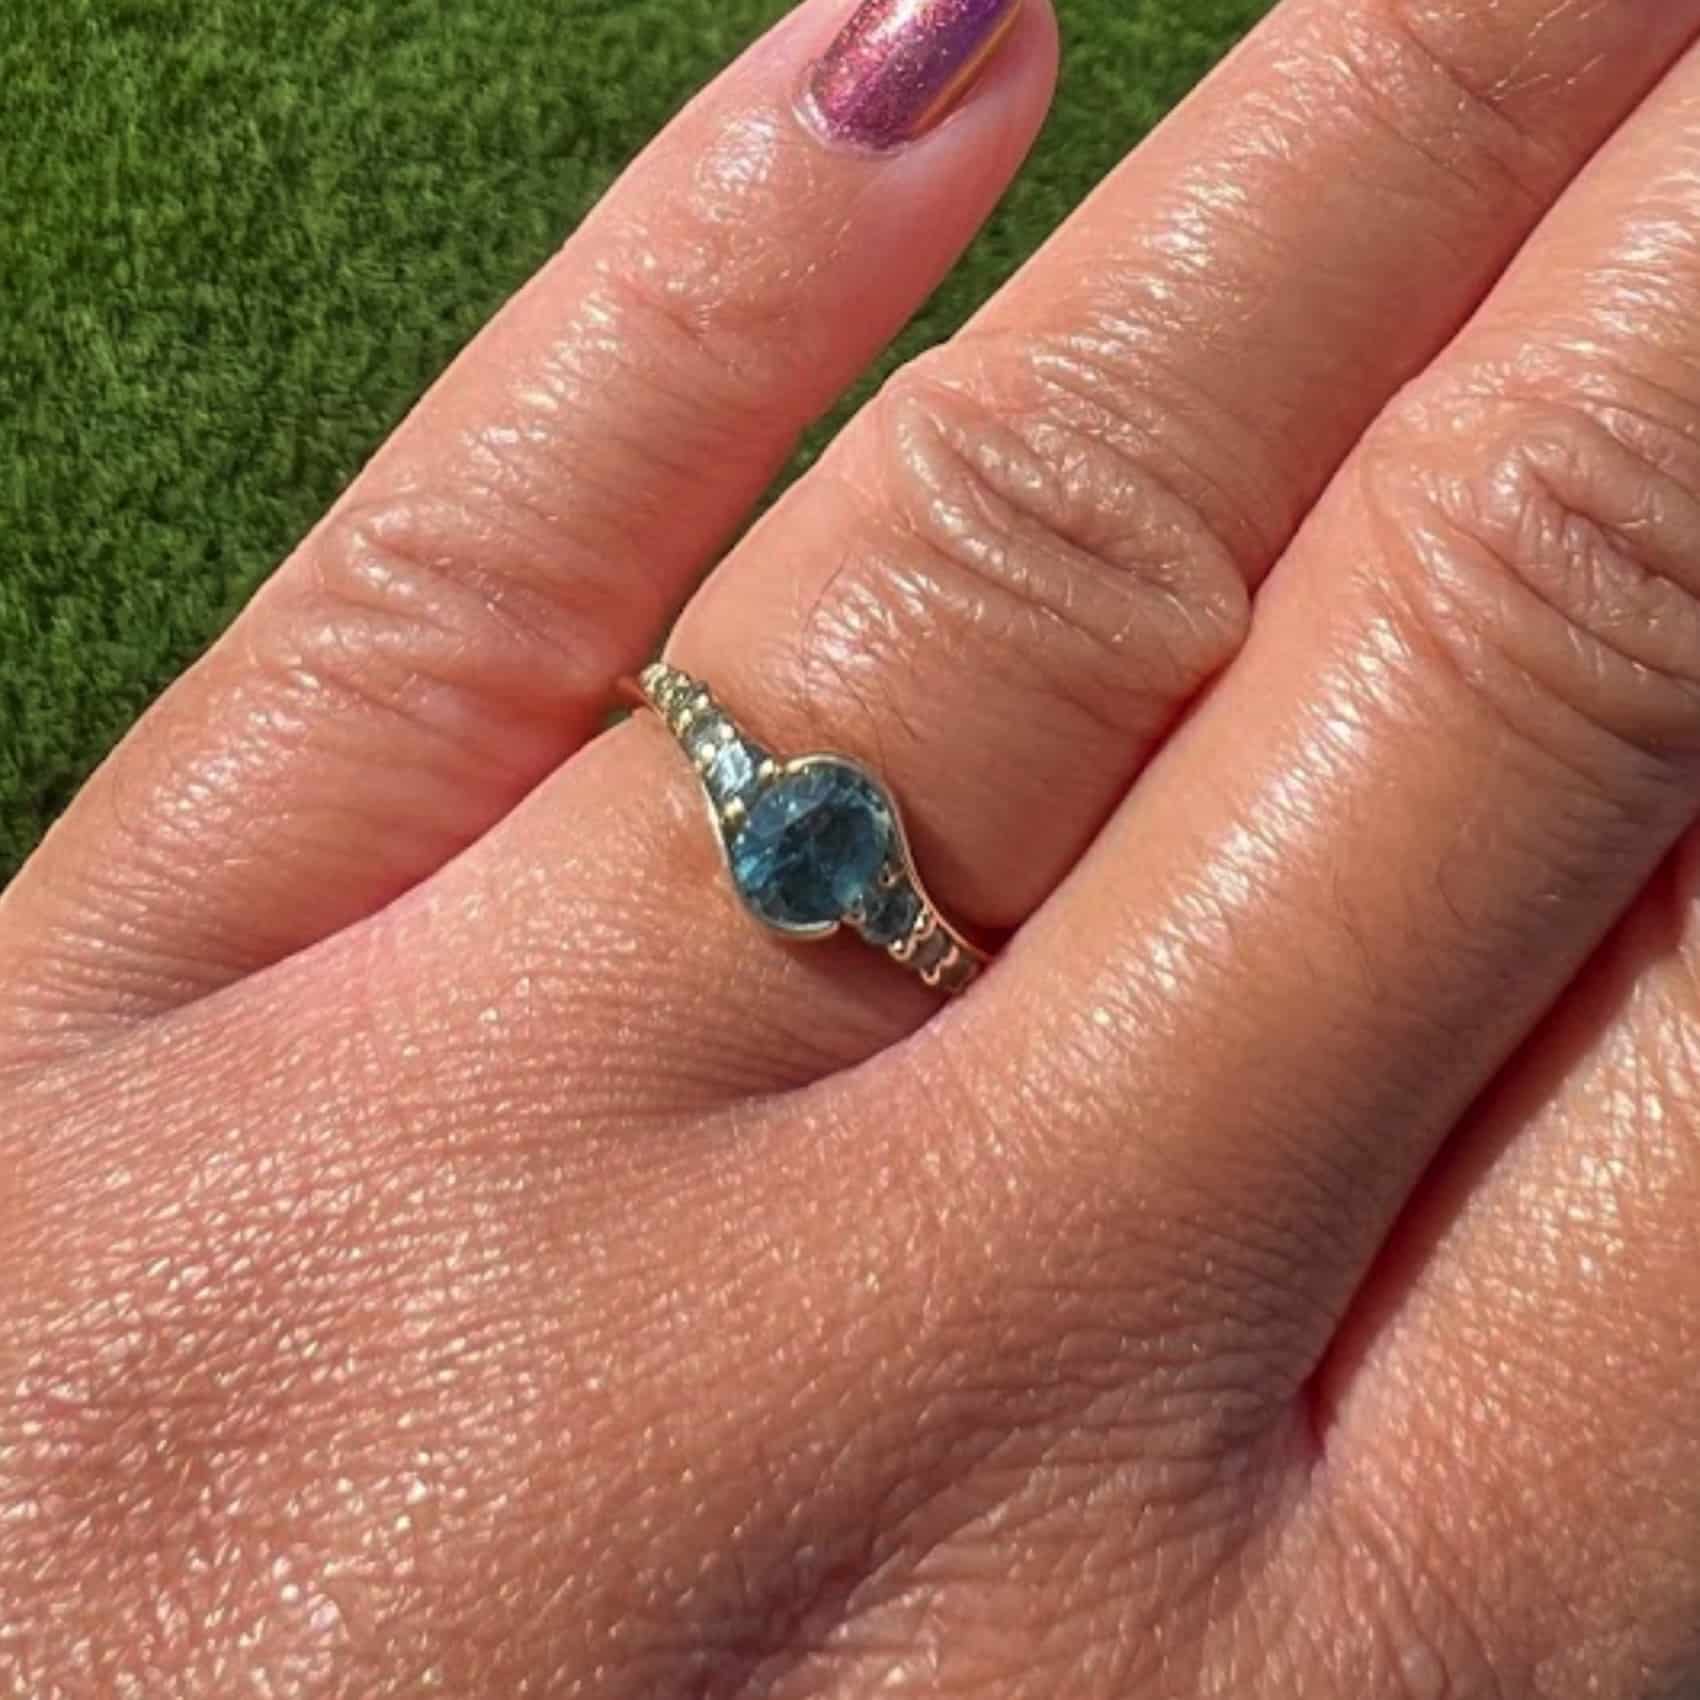 A photo from a customer review featuring a yellow gold "Venus" ring with a teal oval sapphire on a pink-manicured hand against grass